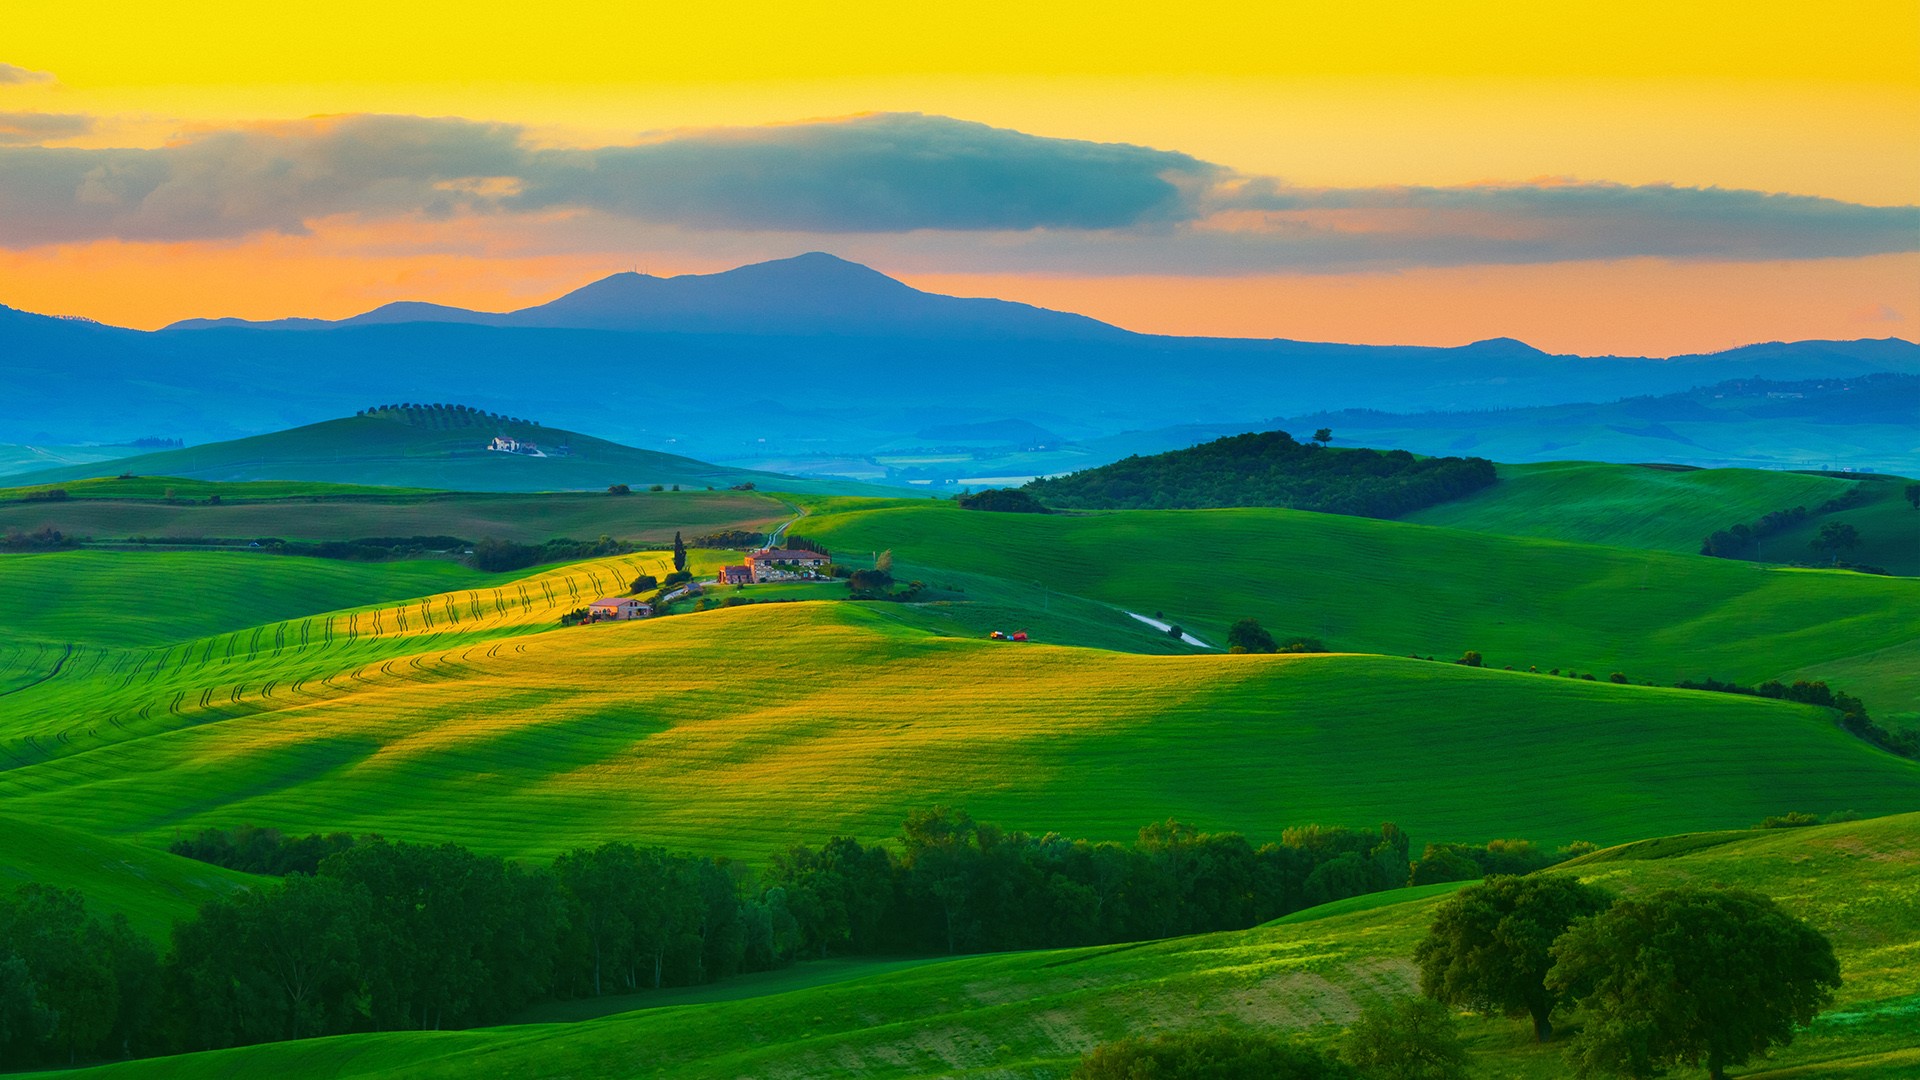 Nature Landscape Mountains Clouds Trees Sunset Grass Field Tuscany Italy 1920x1080